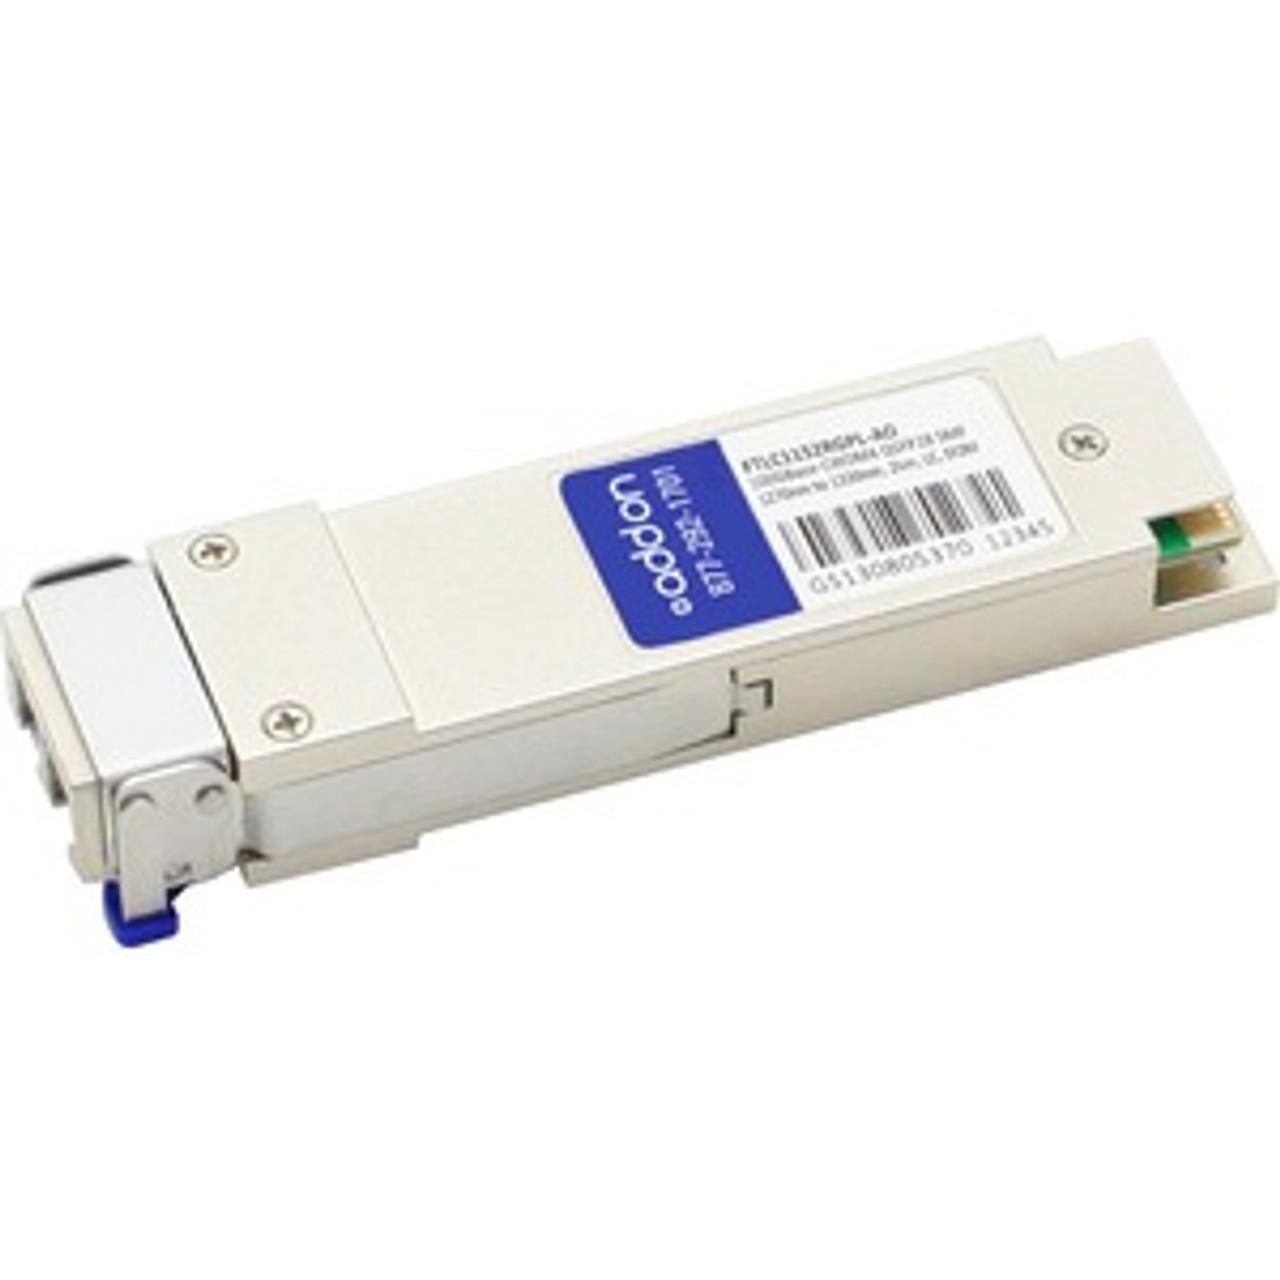 FTLC1152RGPL-AO AddOn 100Gbps 100GBase-CWDM4 Single-mode Fiber 2km 1310nm Duplex LC Connector QSFP28 Transceiver Module for Finisar Compatible